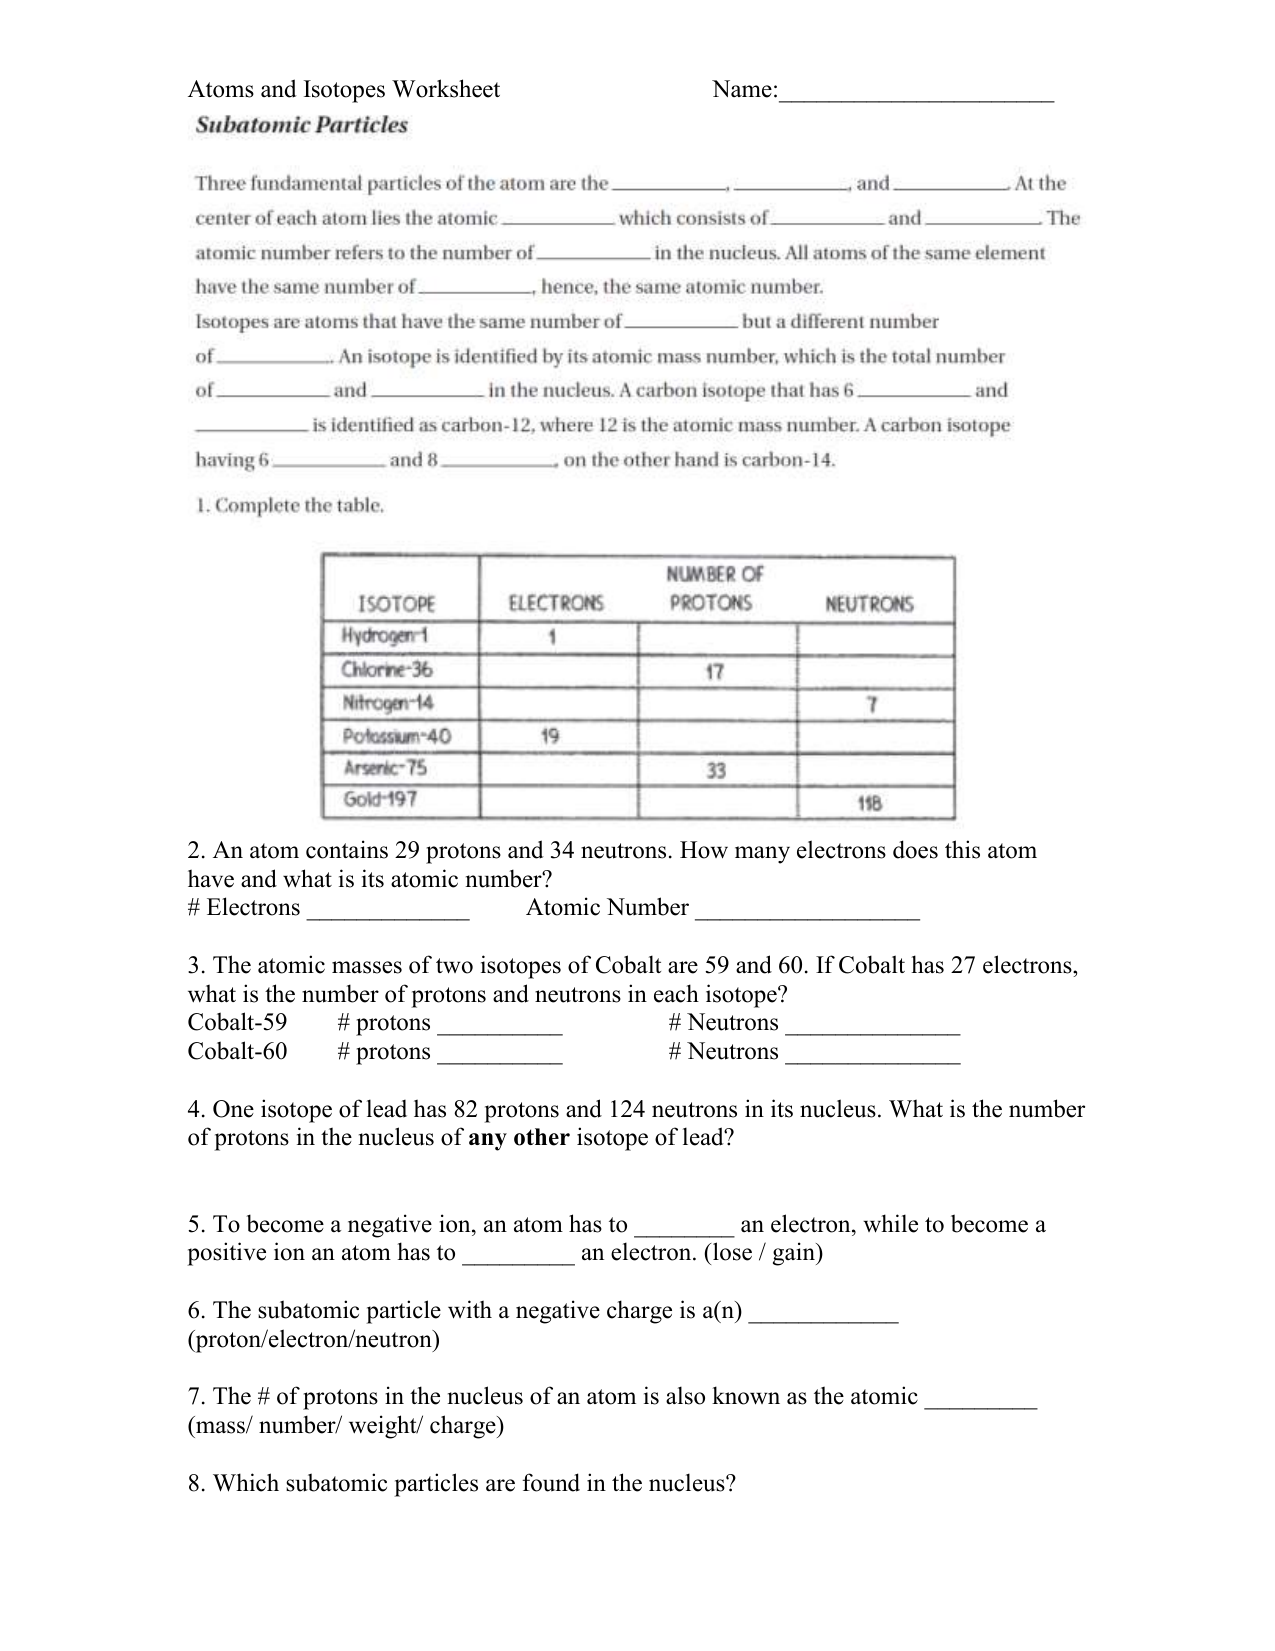 Atoms and Isotopes Worksheet Within Atoms And Isotopes Worksheet Answers